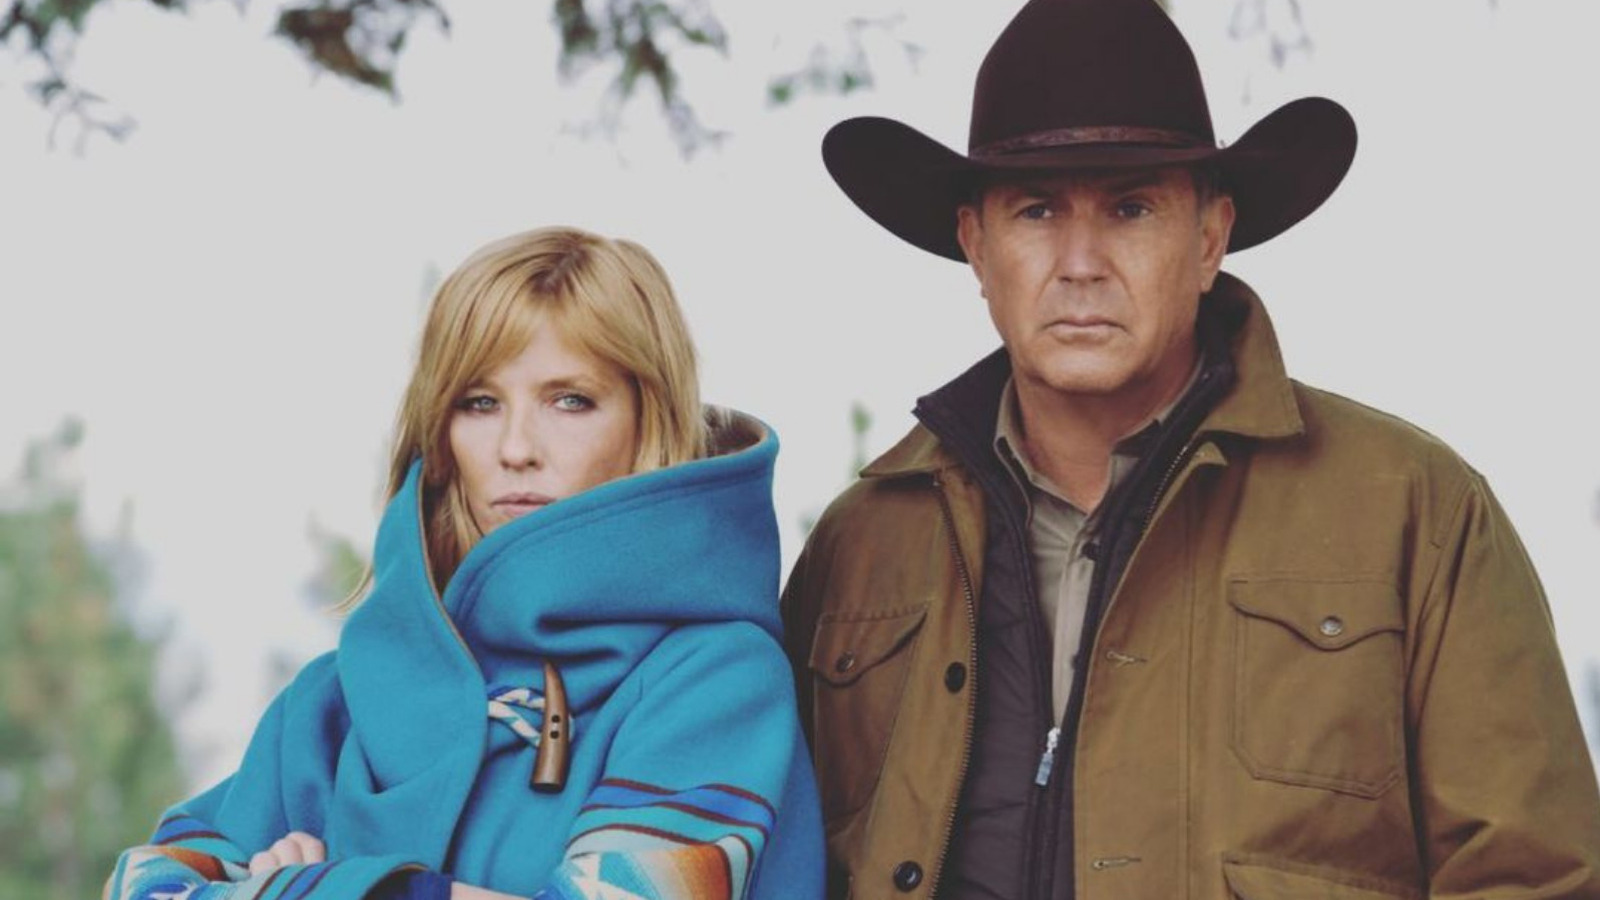 The Real Reason You Recognize Yellowstone's Beth Dutton